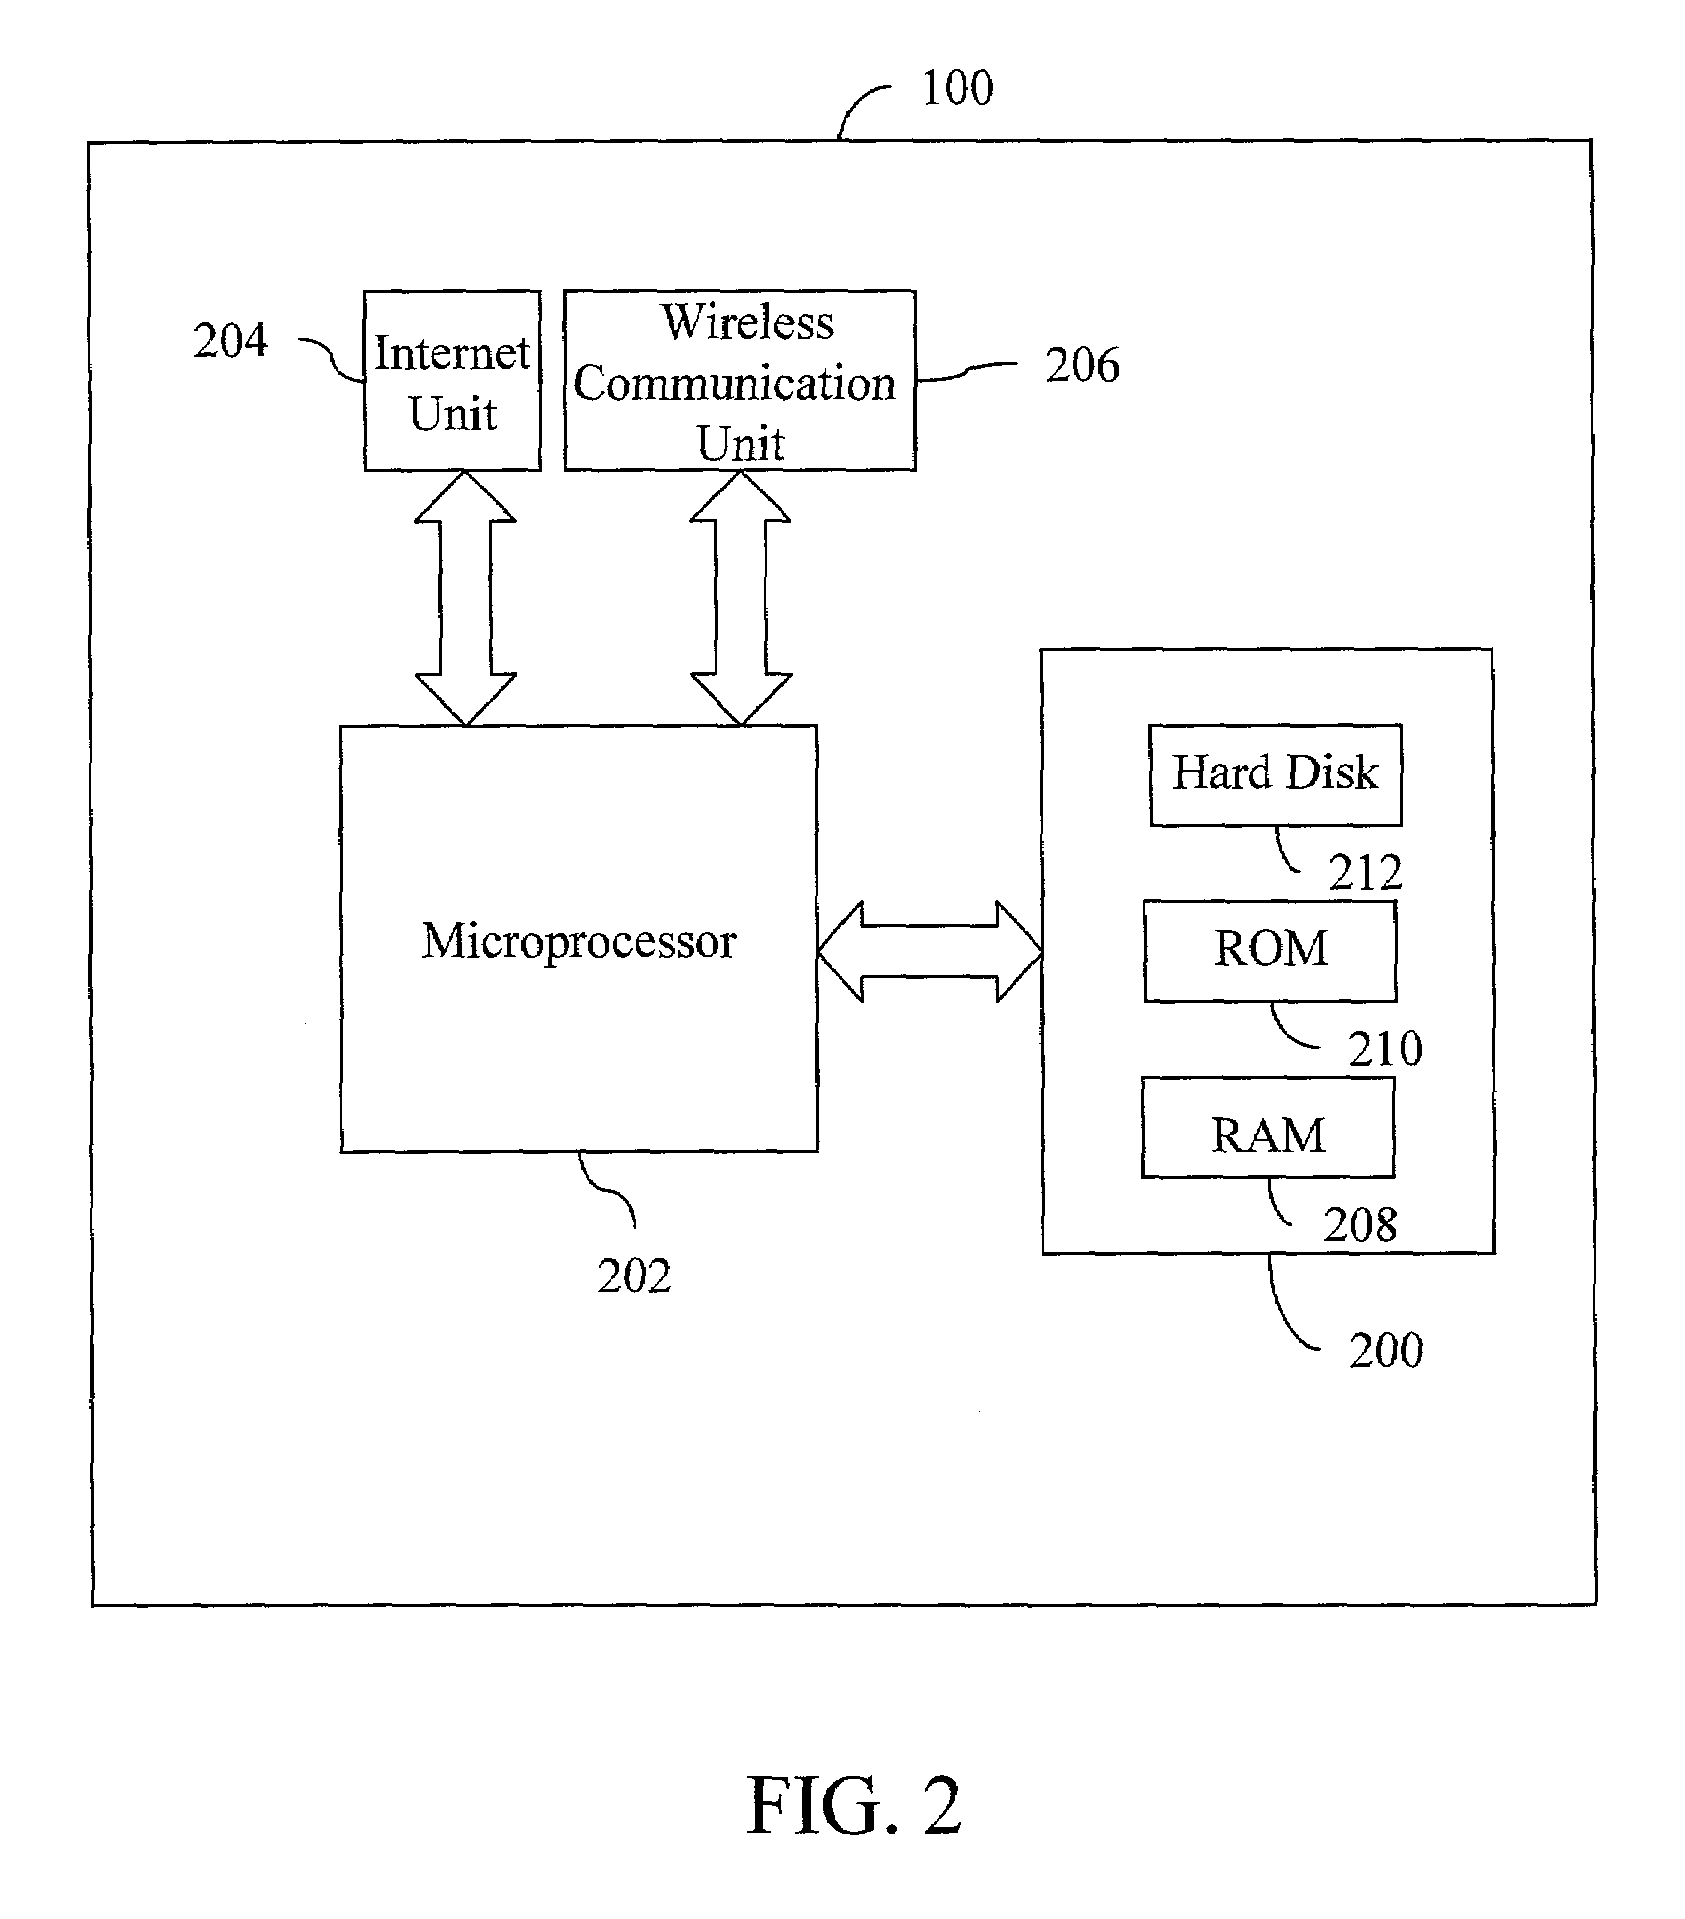 System and methodology for control of, and access and response to internet email from a wireless device